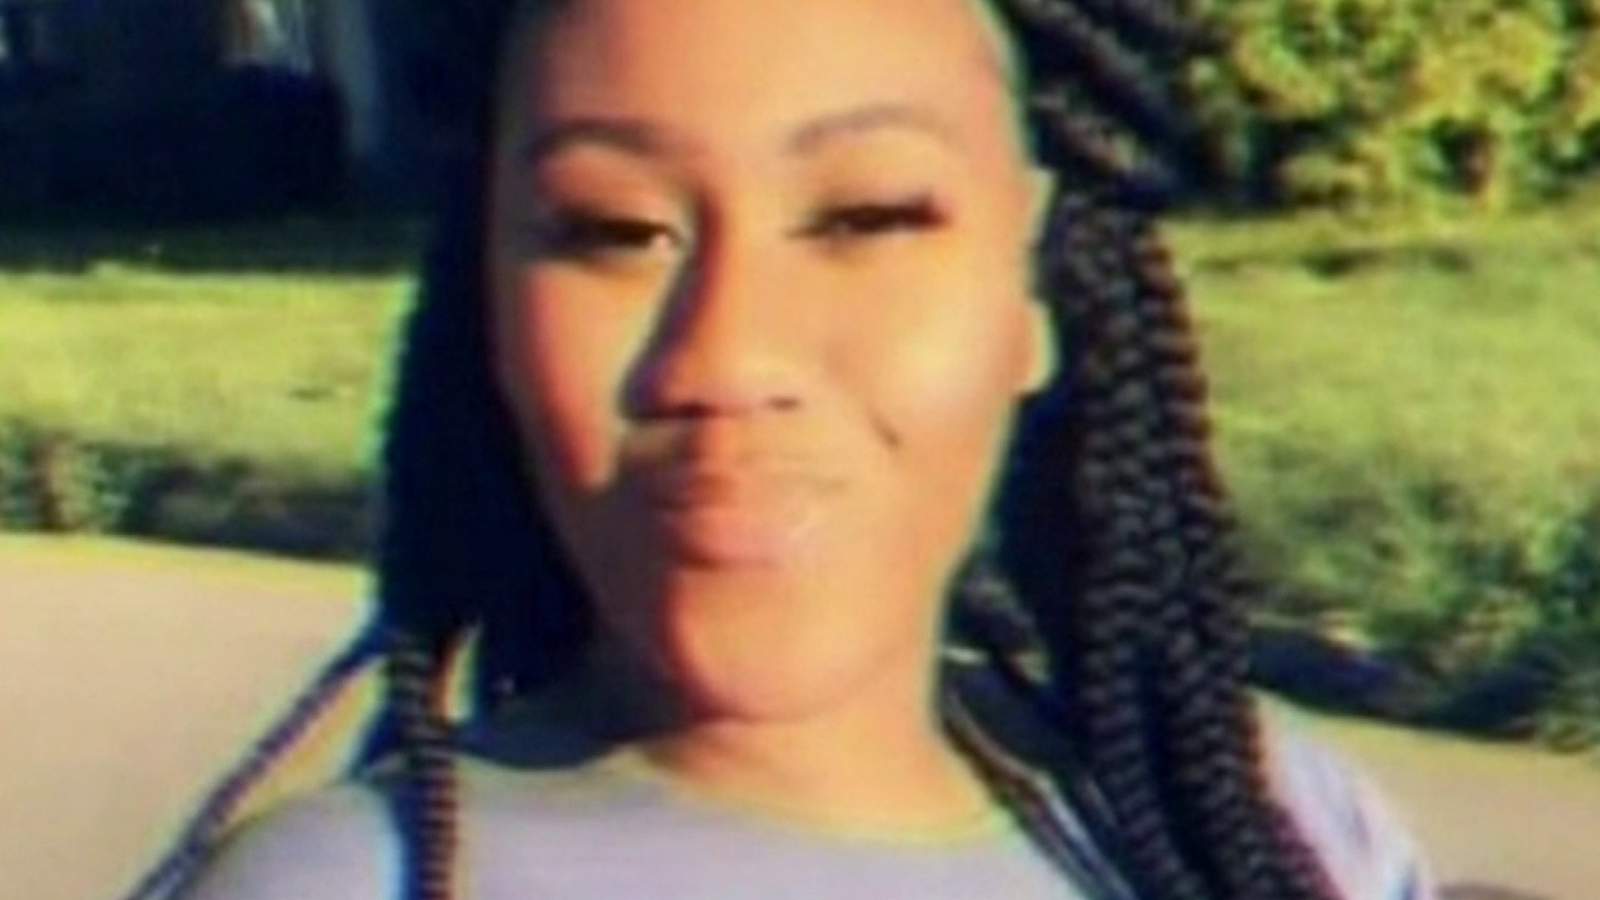 ‘We love her’: Family mourns missing 20-year-old woman after body found in Detroit home